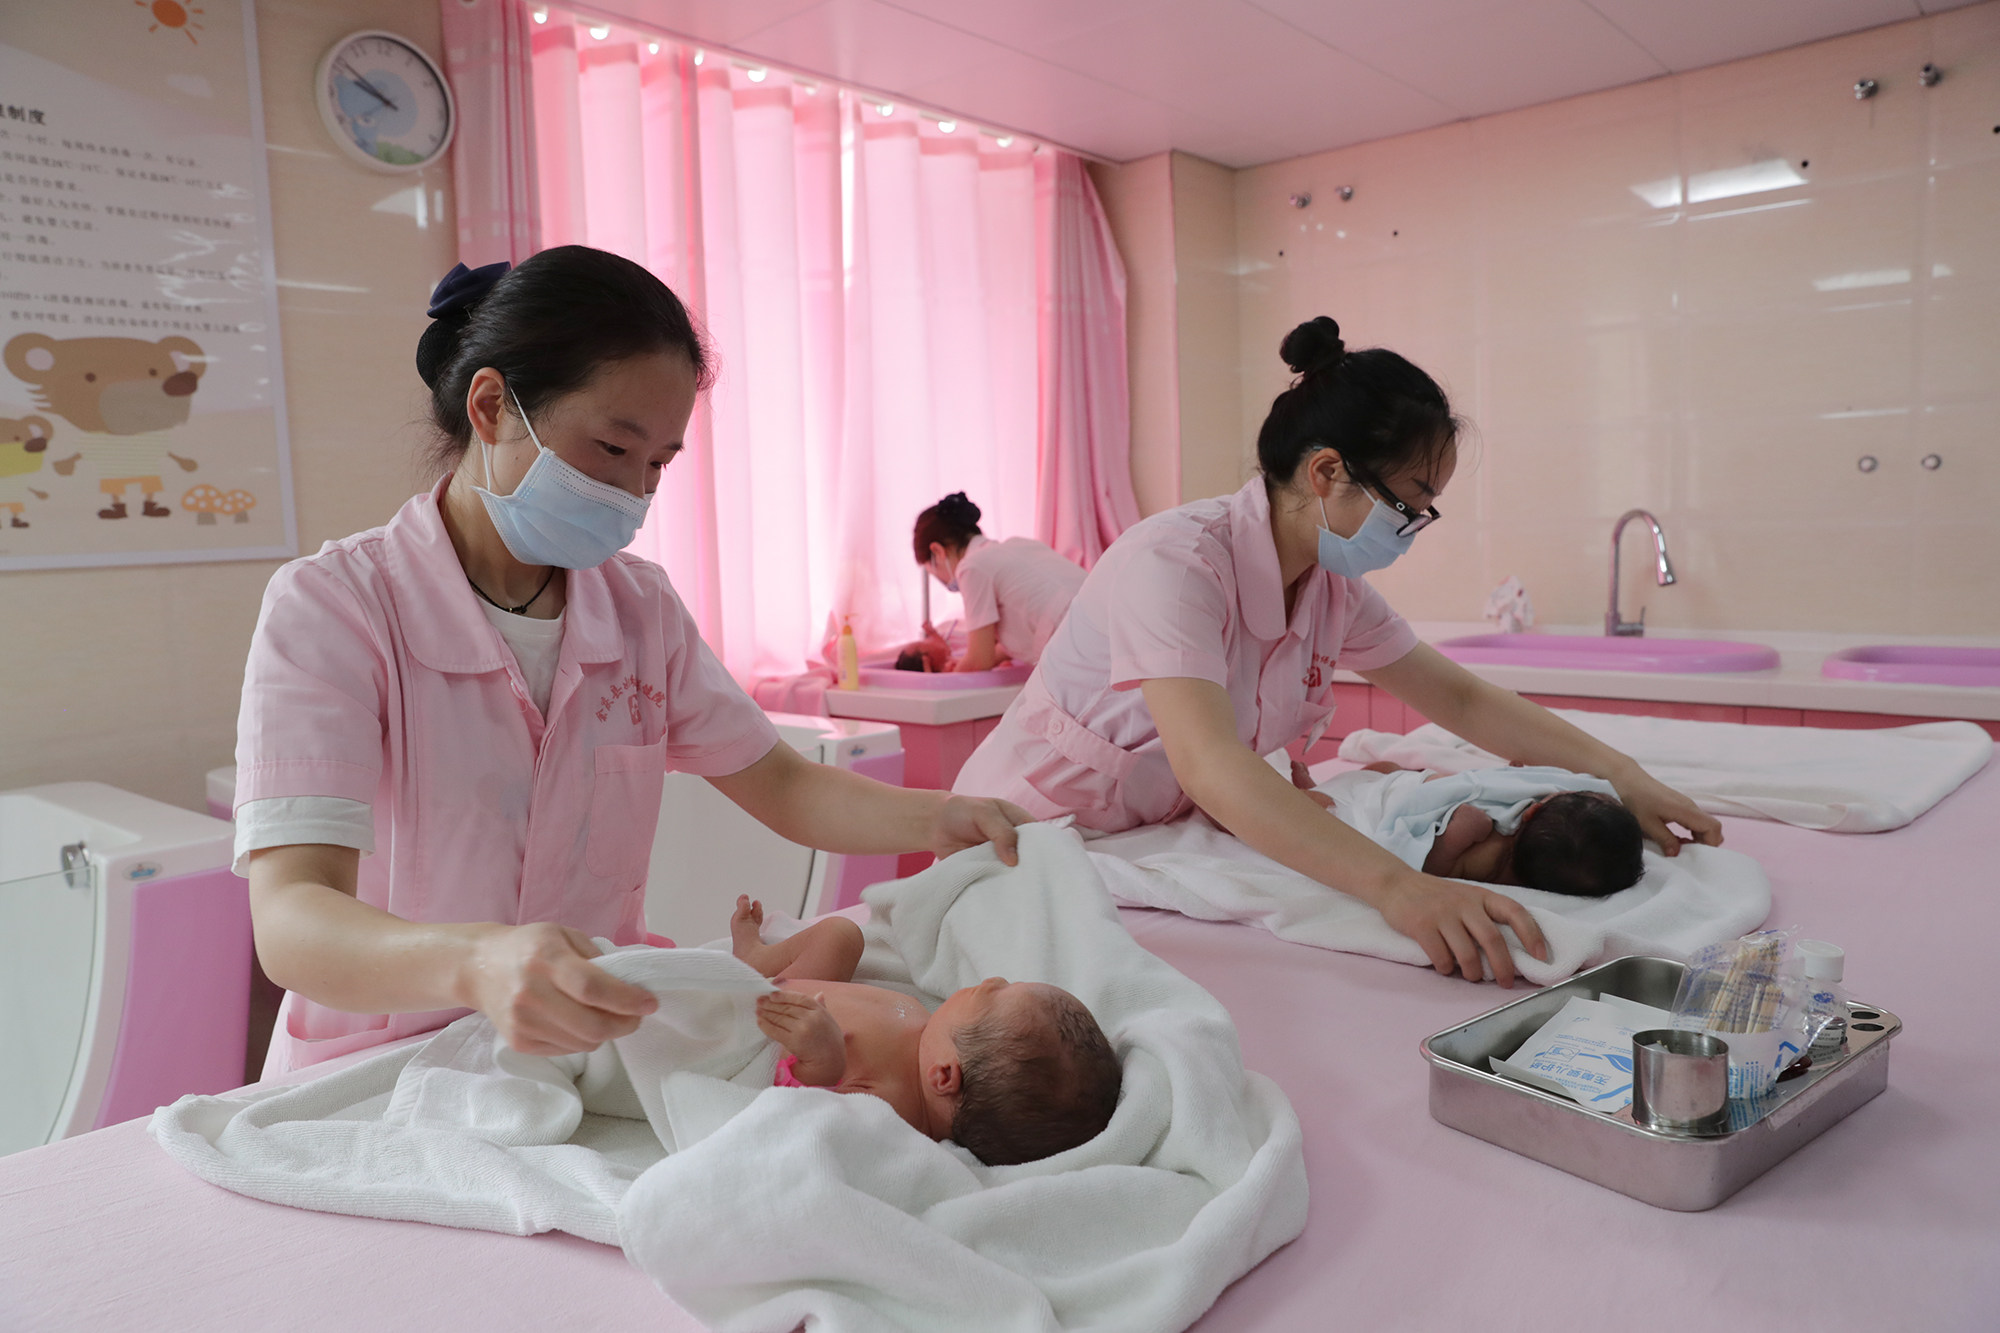 Wuhu’s low birth rate is indicative of a broader population problem for China.
Photo: Xinhua